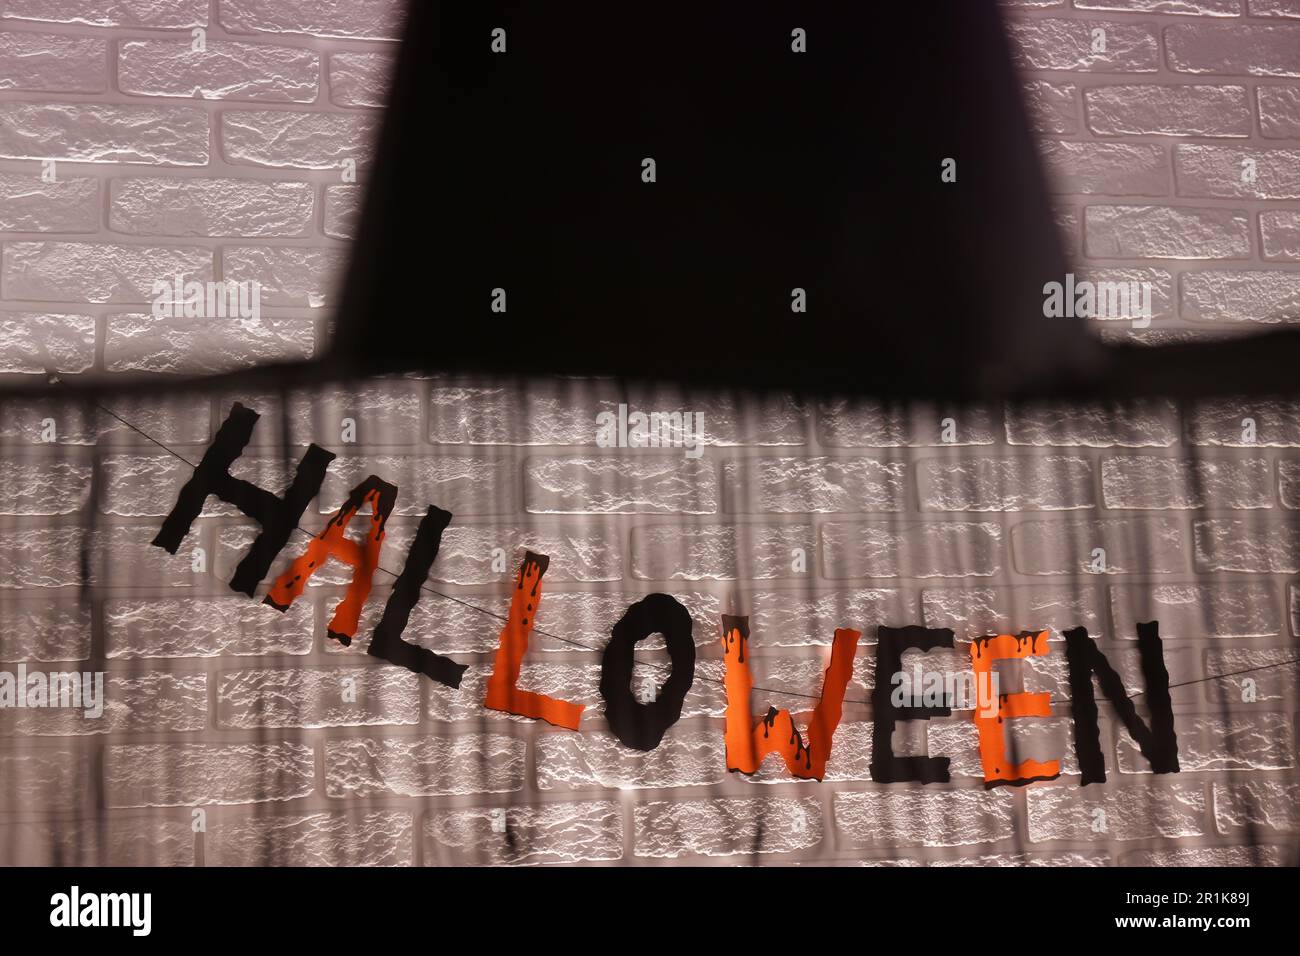 Word Halloween made of colorful letters and festive decor on brick wall Stock Photo